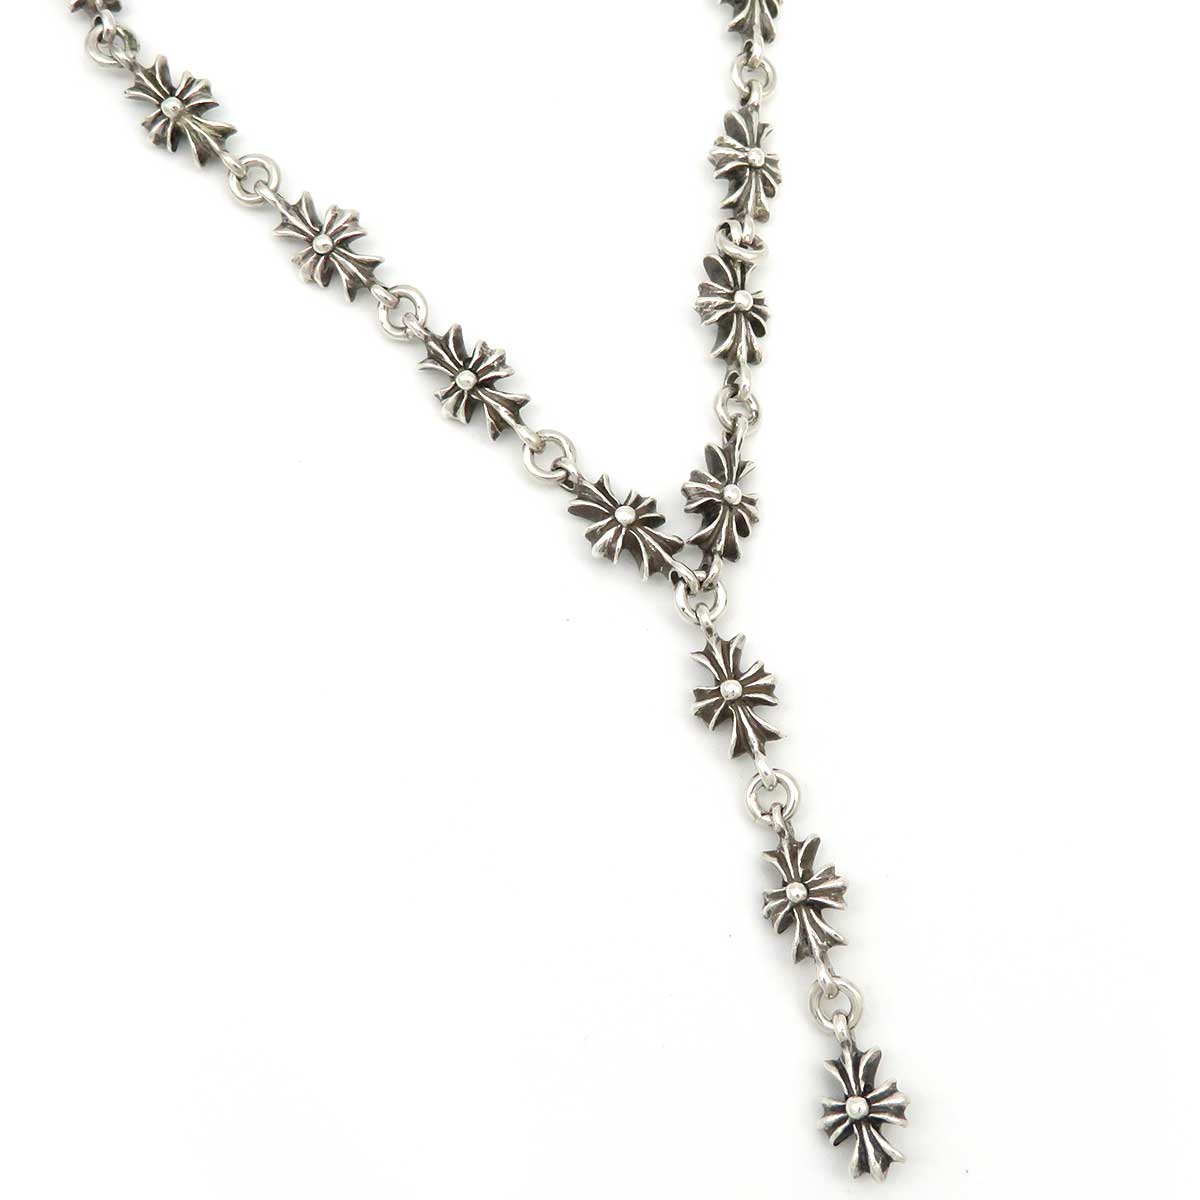 Tiny Cross Chain Silver Necklace